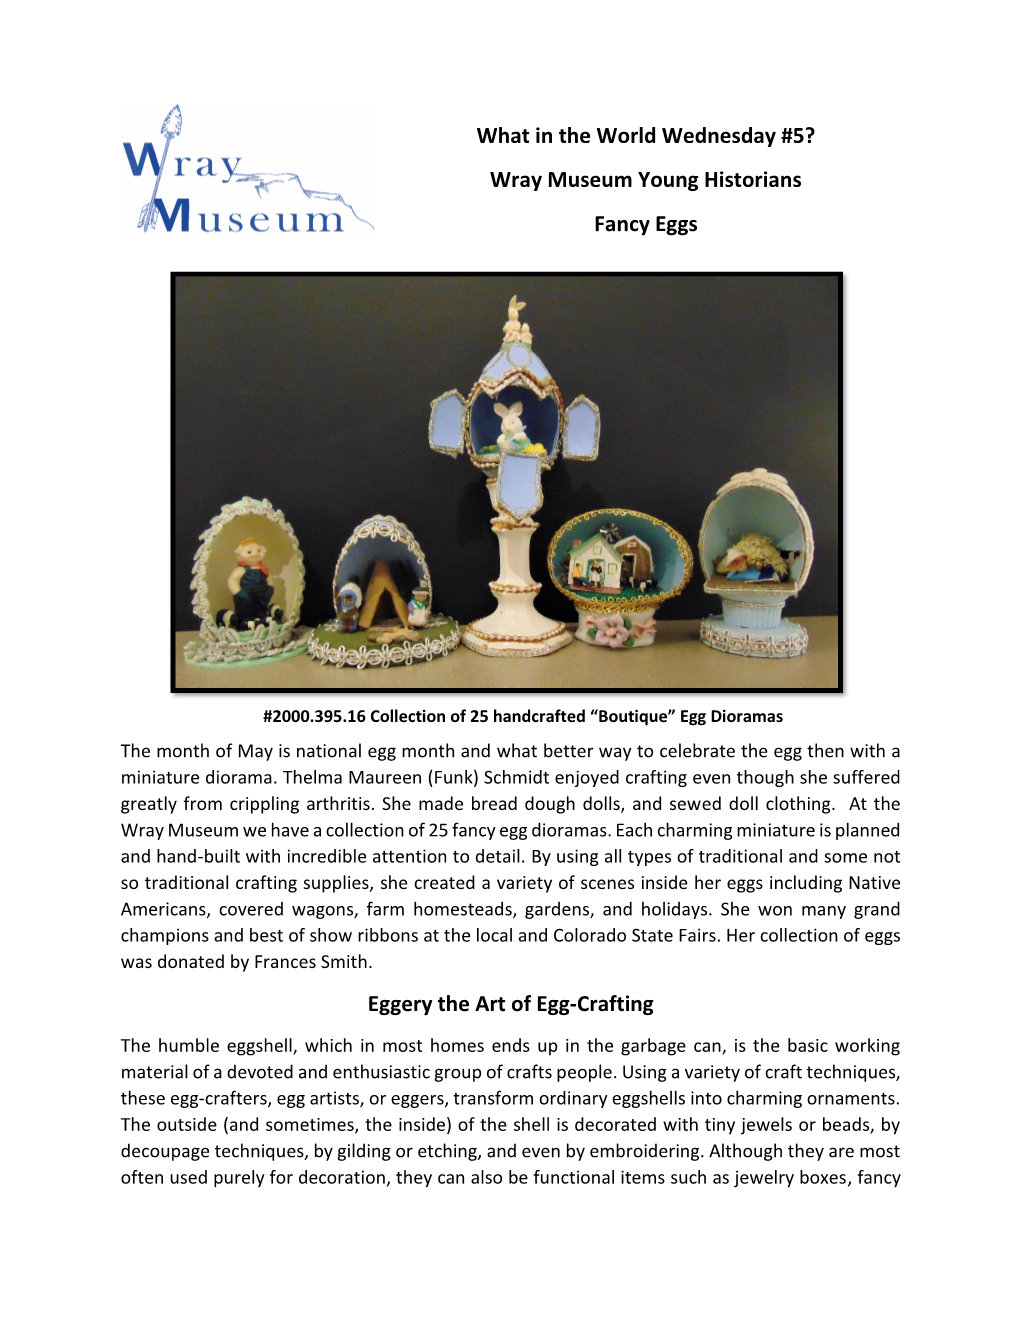 What in the World Wednesday #5? Wray Museum Young Historians Fancy Eggs